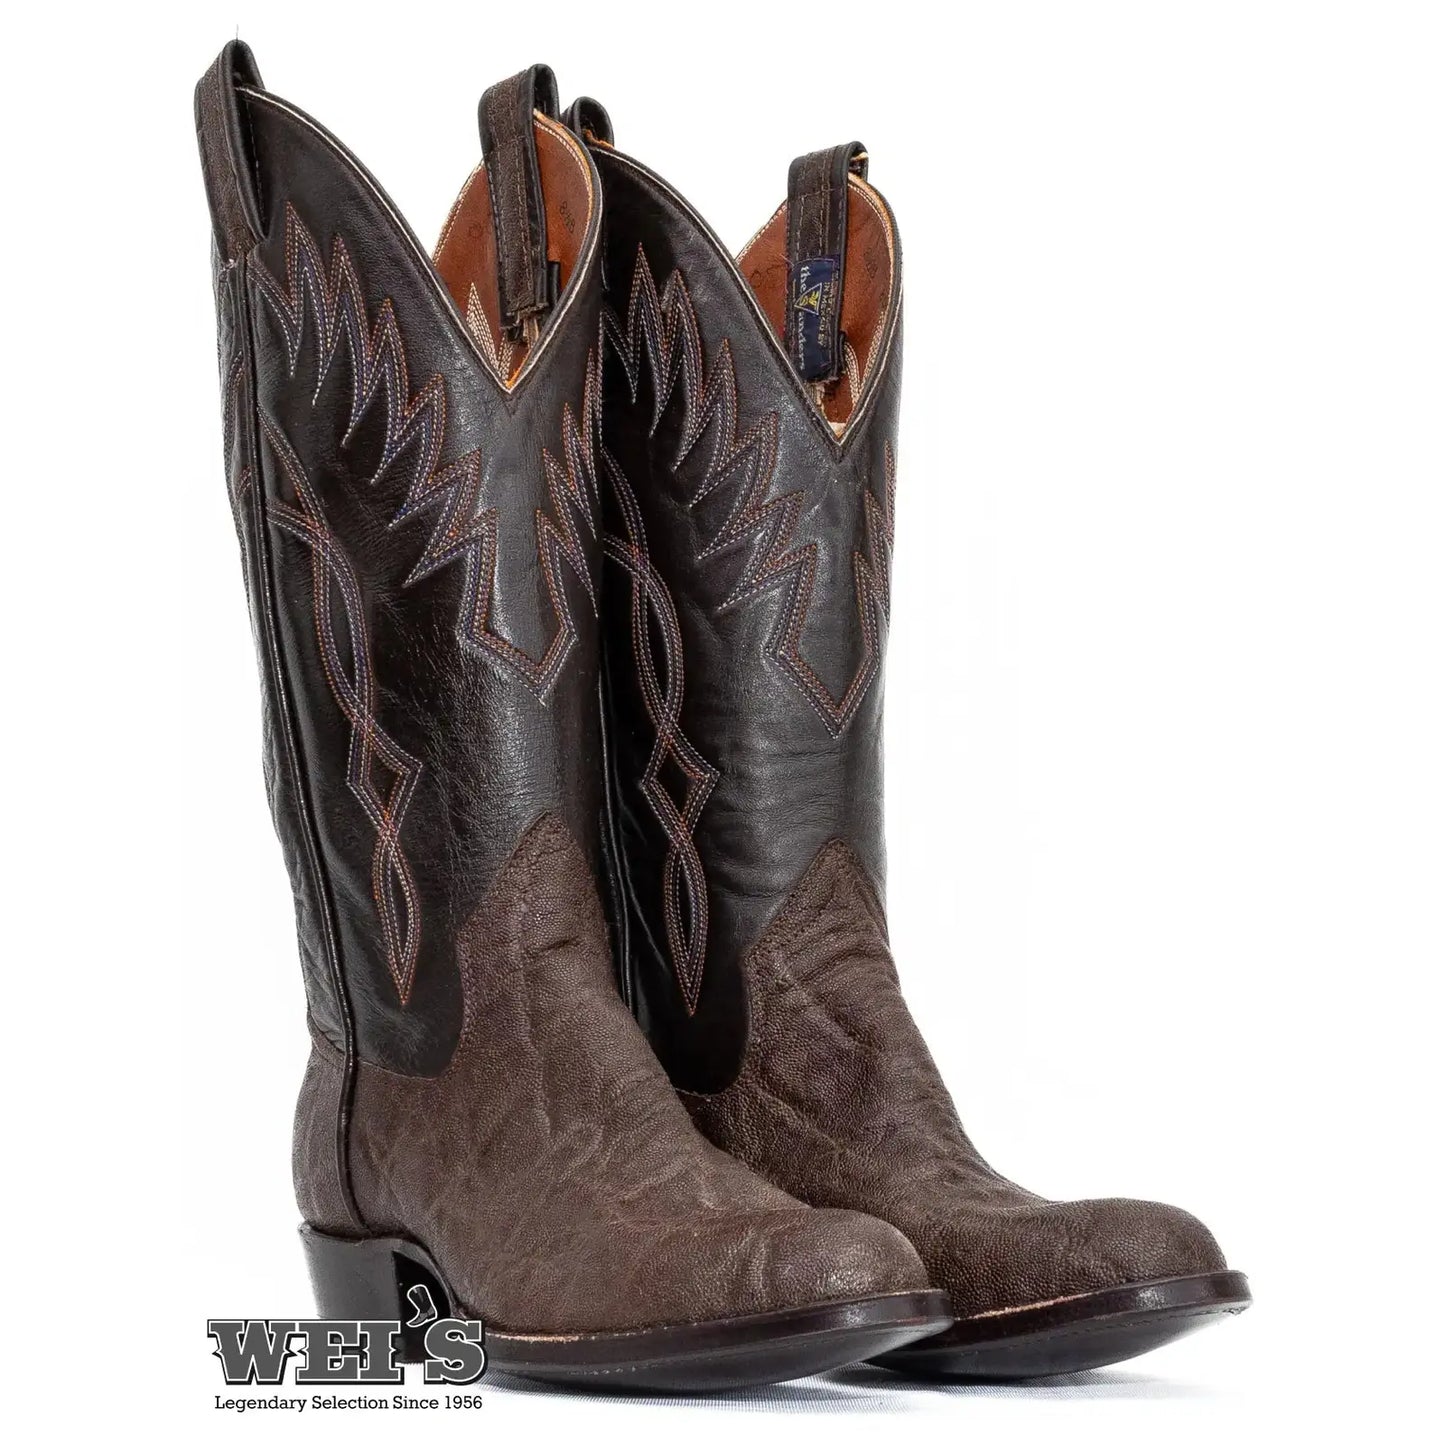 Panhandle Slim Women's Cowgirl Boot 13" Exotic Elephant R-Toe 21Elephant - Panhandle Slim Boots